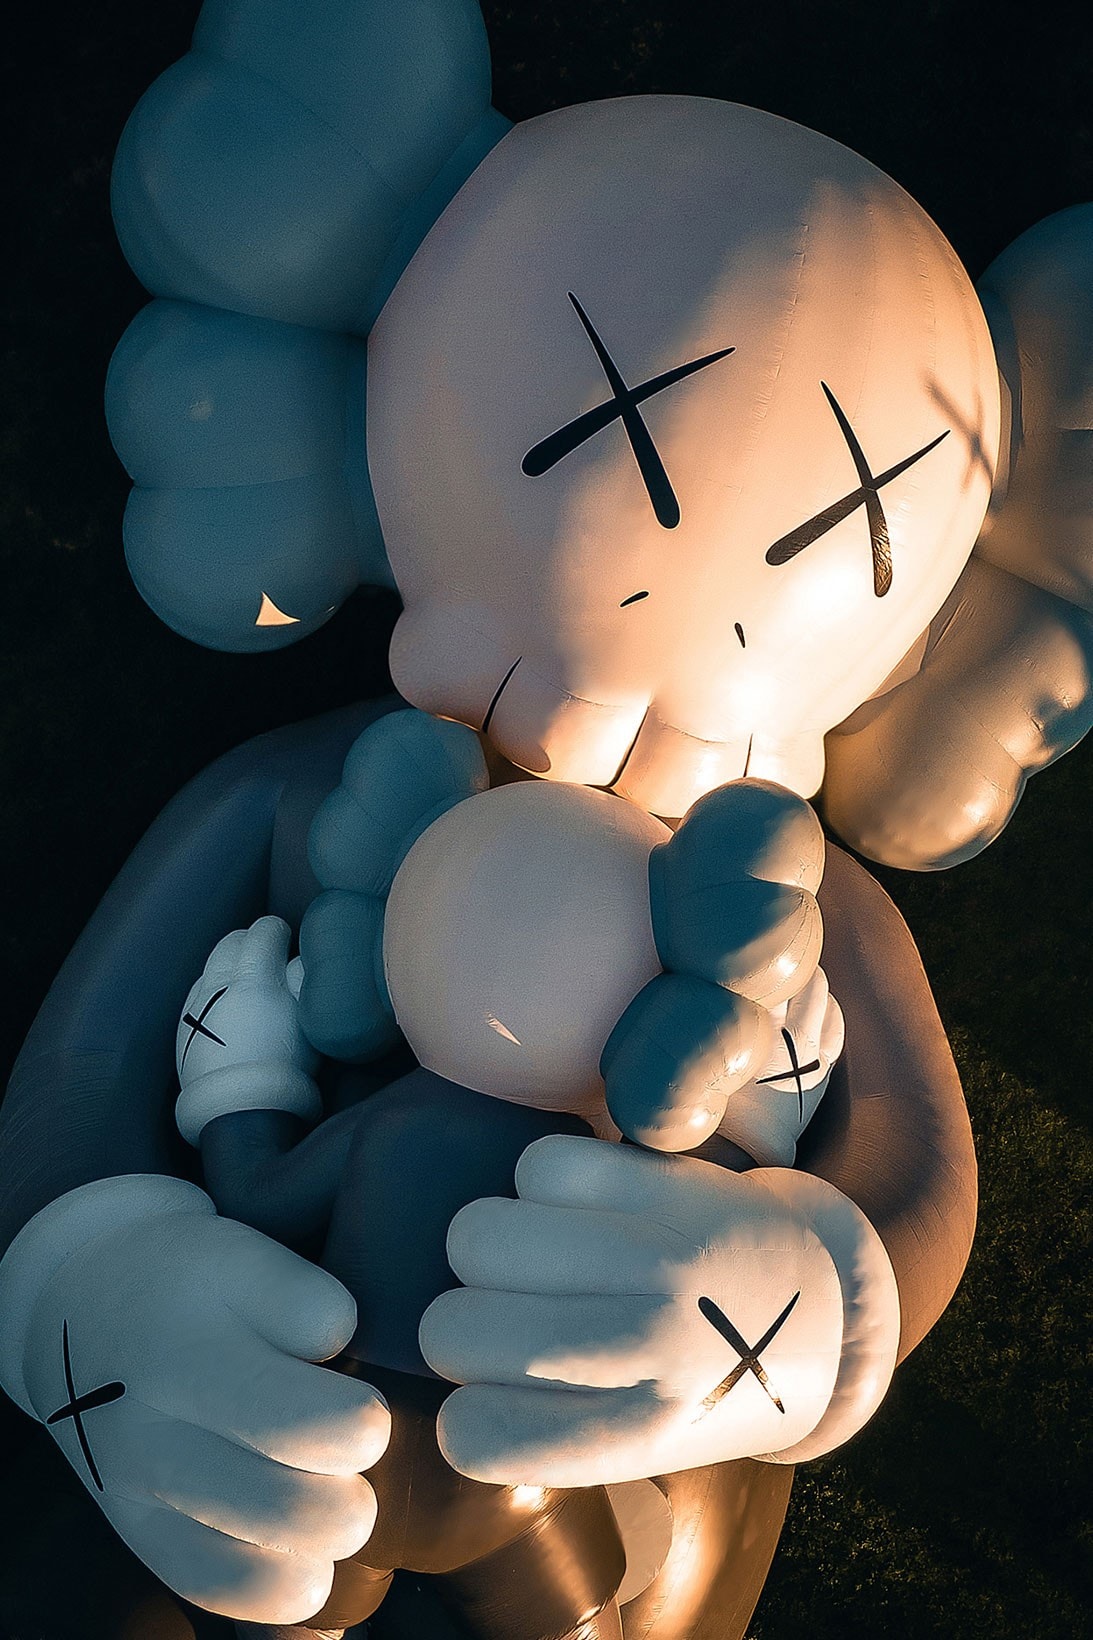 kaws holiday singapore companion installation sculpture collectible collection location release